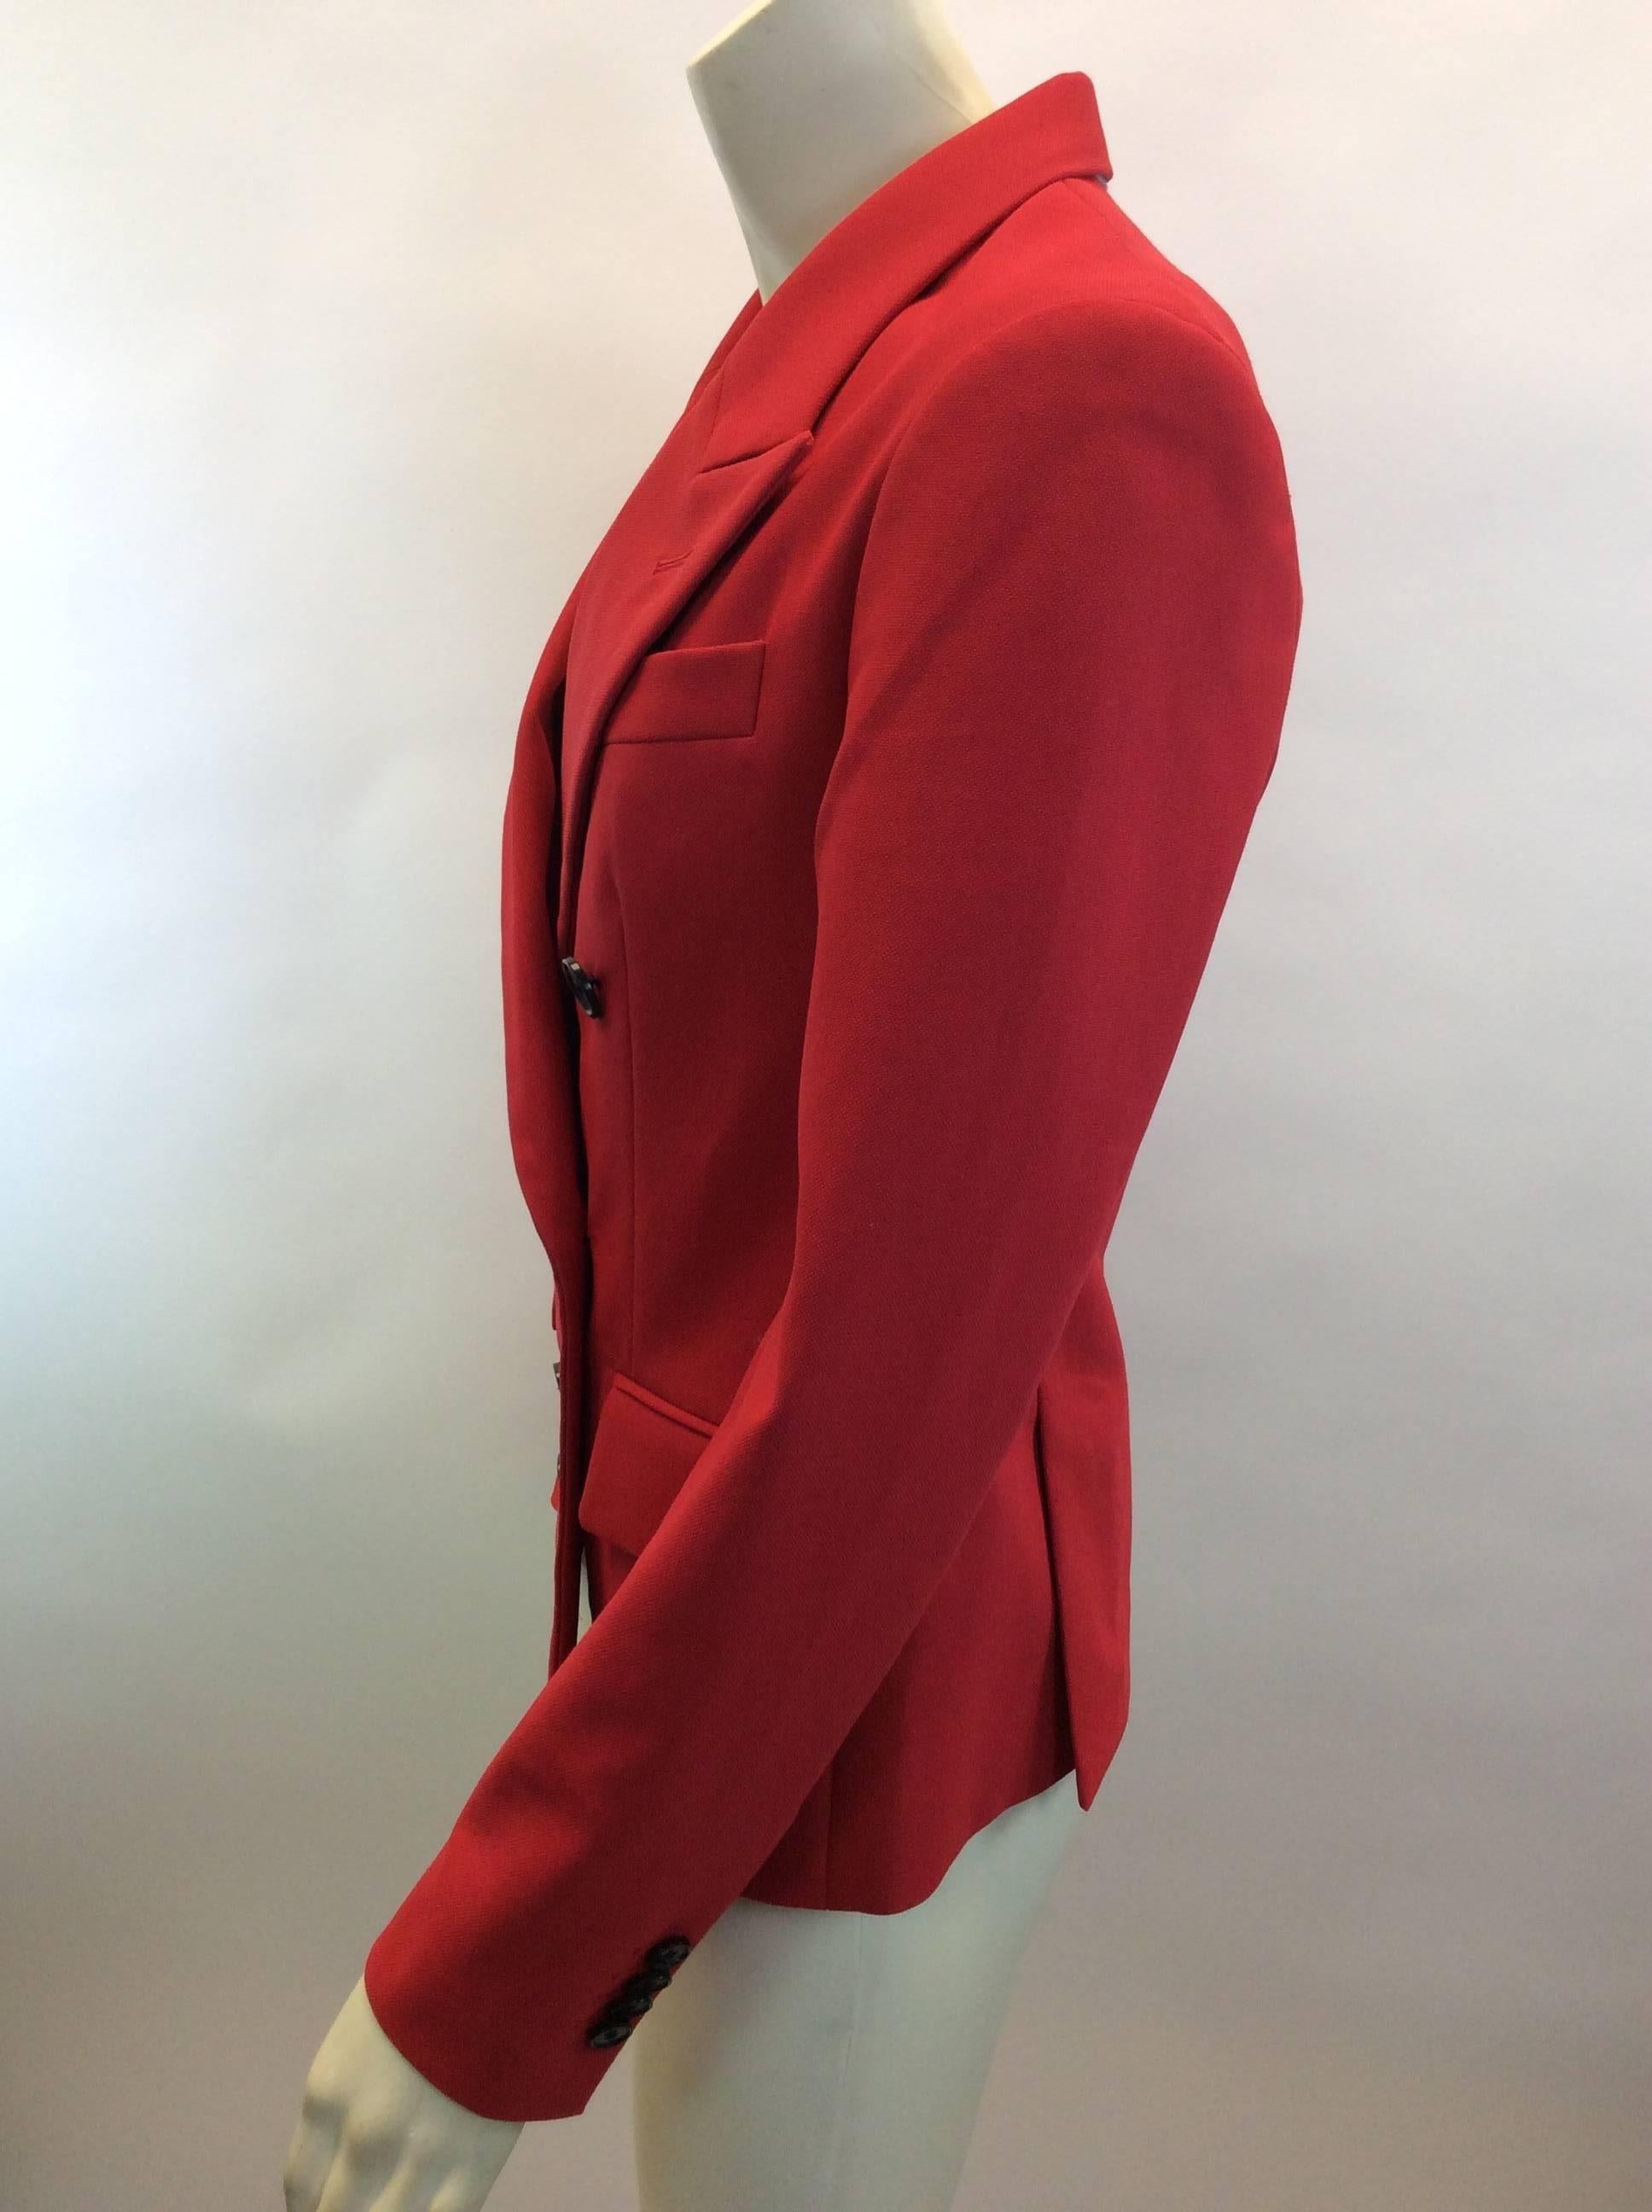 Phillip Lim Red Jacket
$250
Made in China 
50% Polyester
40% Cotton
10% Linen
Lining- 100% Silk, 100% Cotton
Size 0
Length 23.5